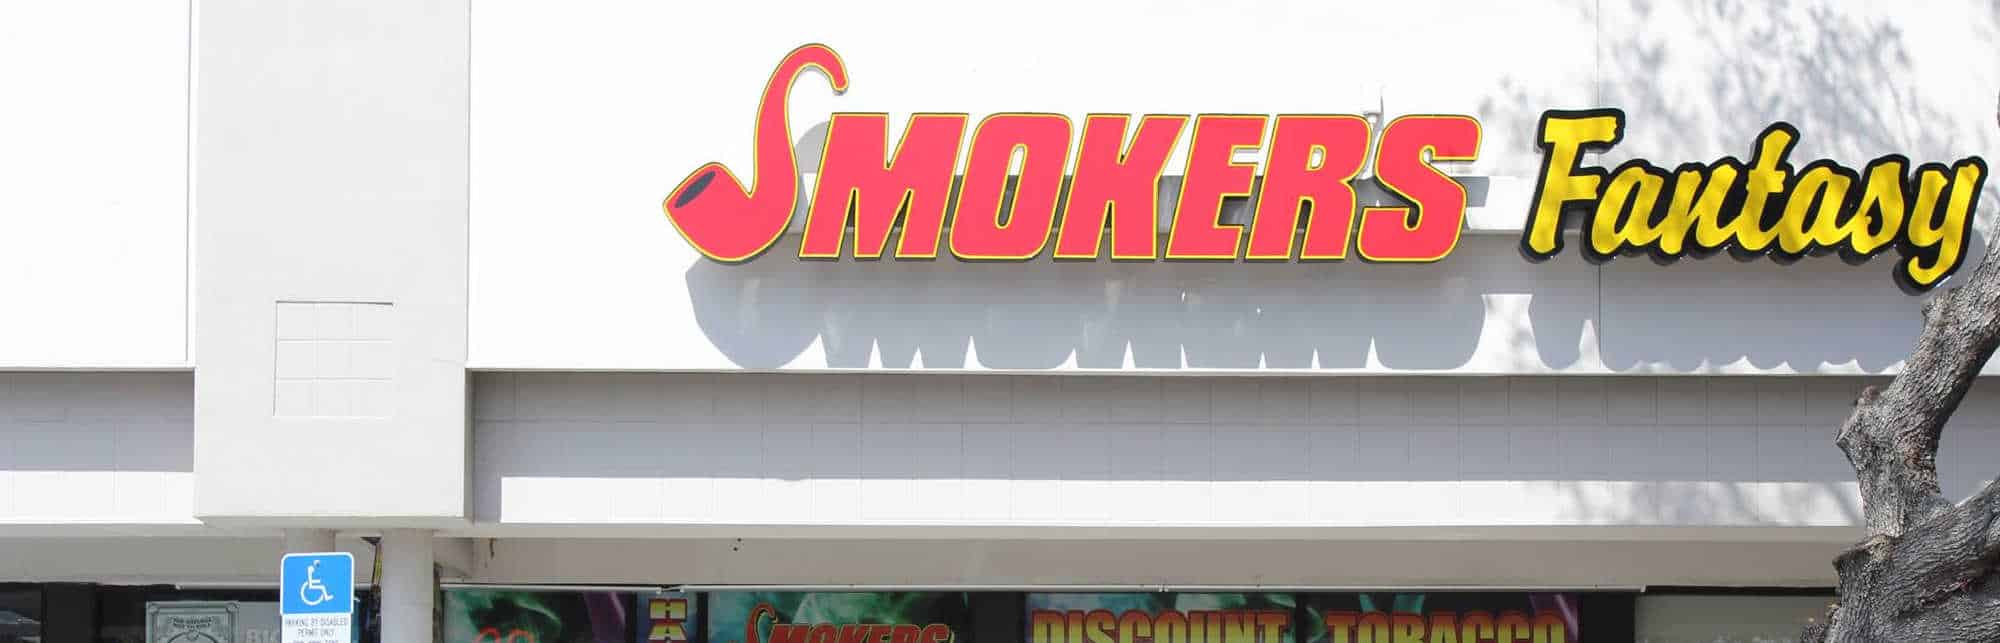 image of smokers fantasy in cleveland ave fort myers